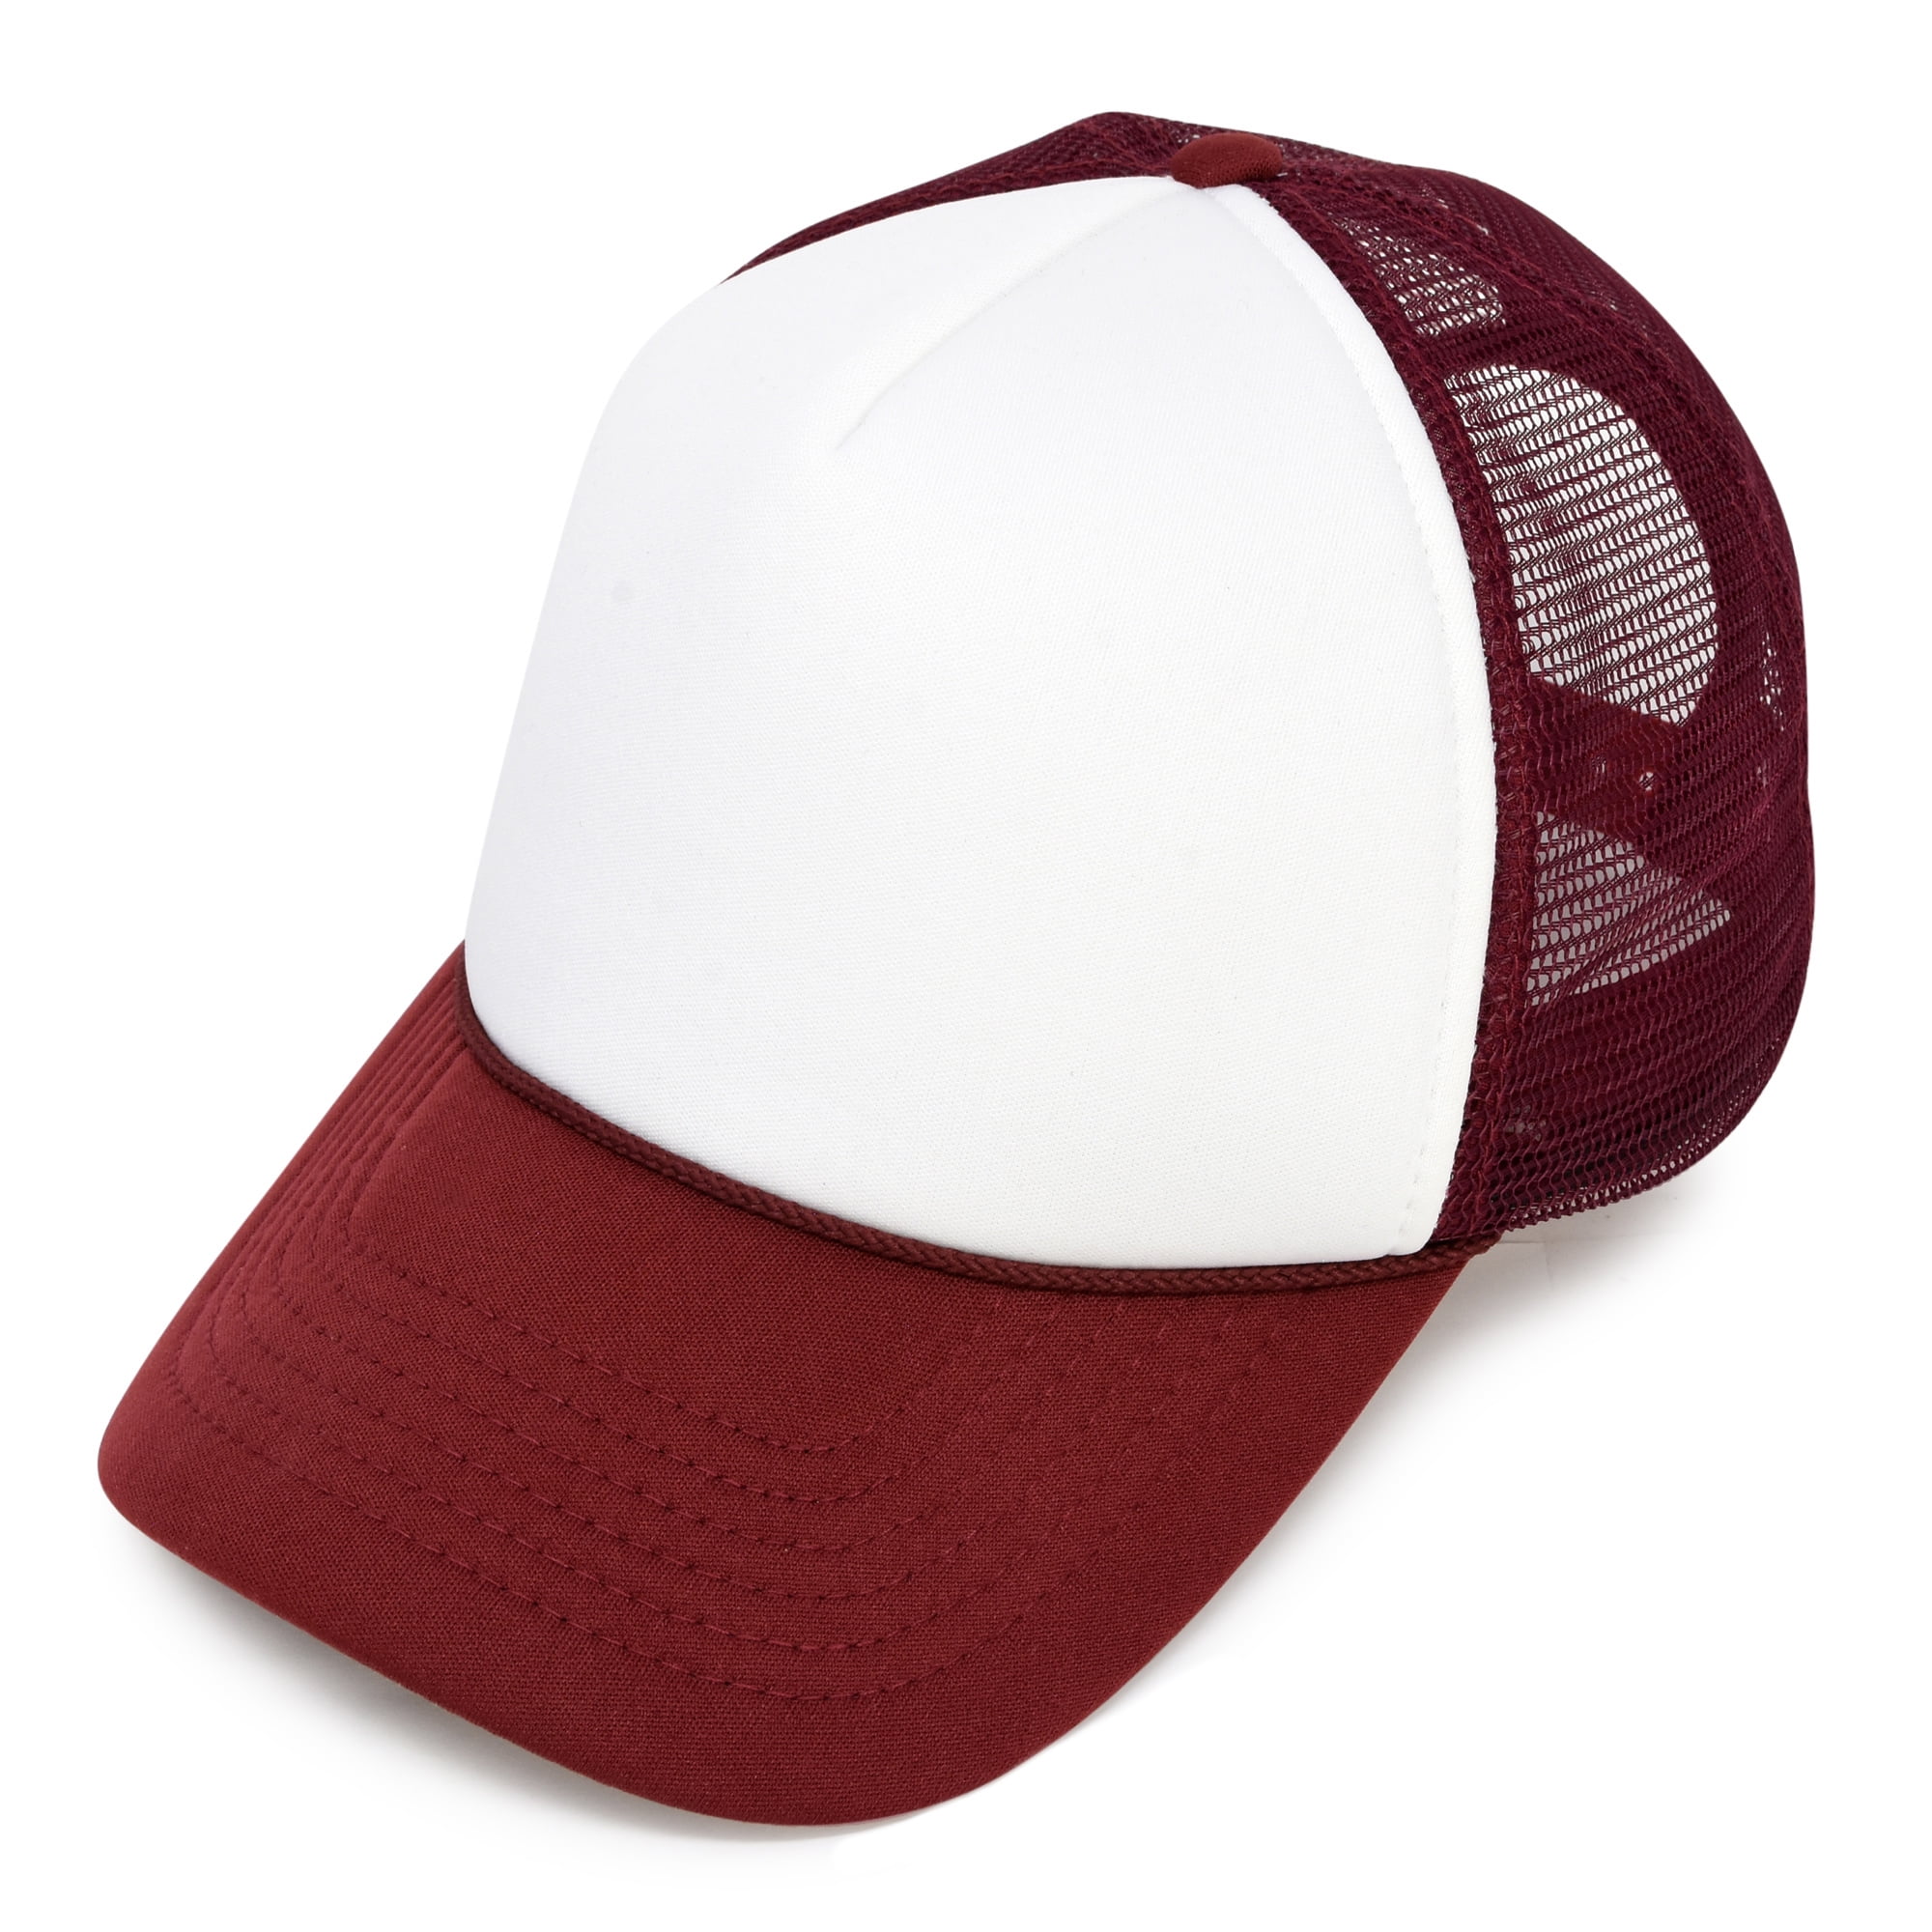 DALIX Two Tone Summer Mesh Cap in Maroon and White Trucker Hat